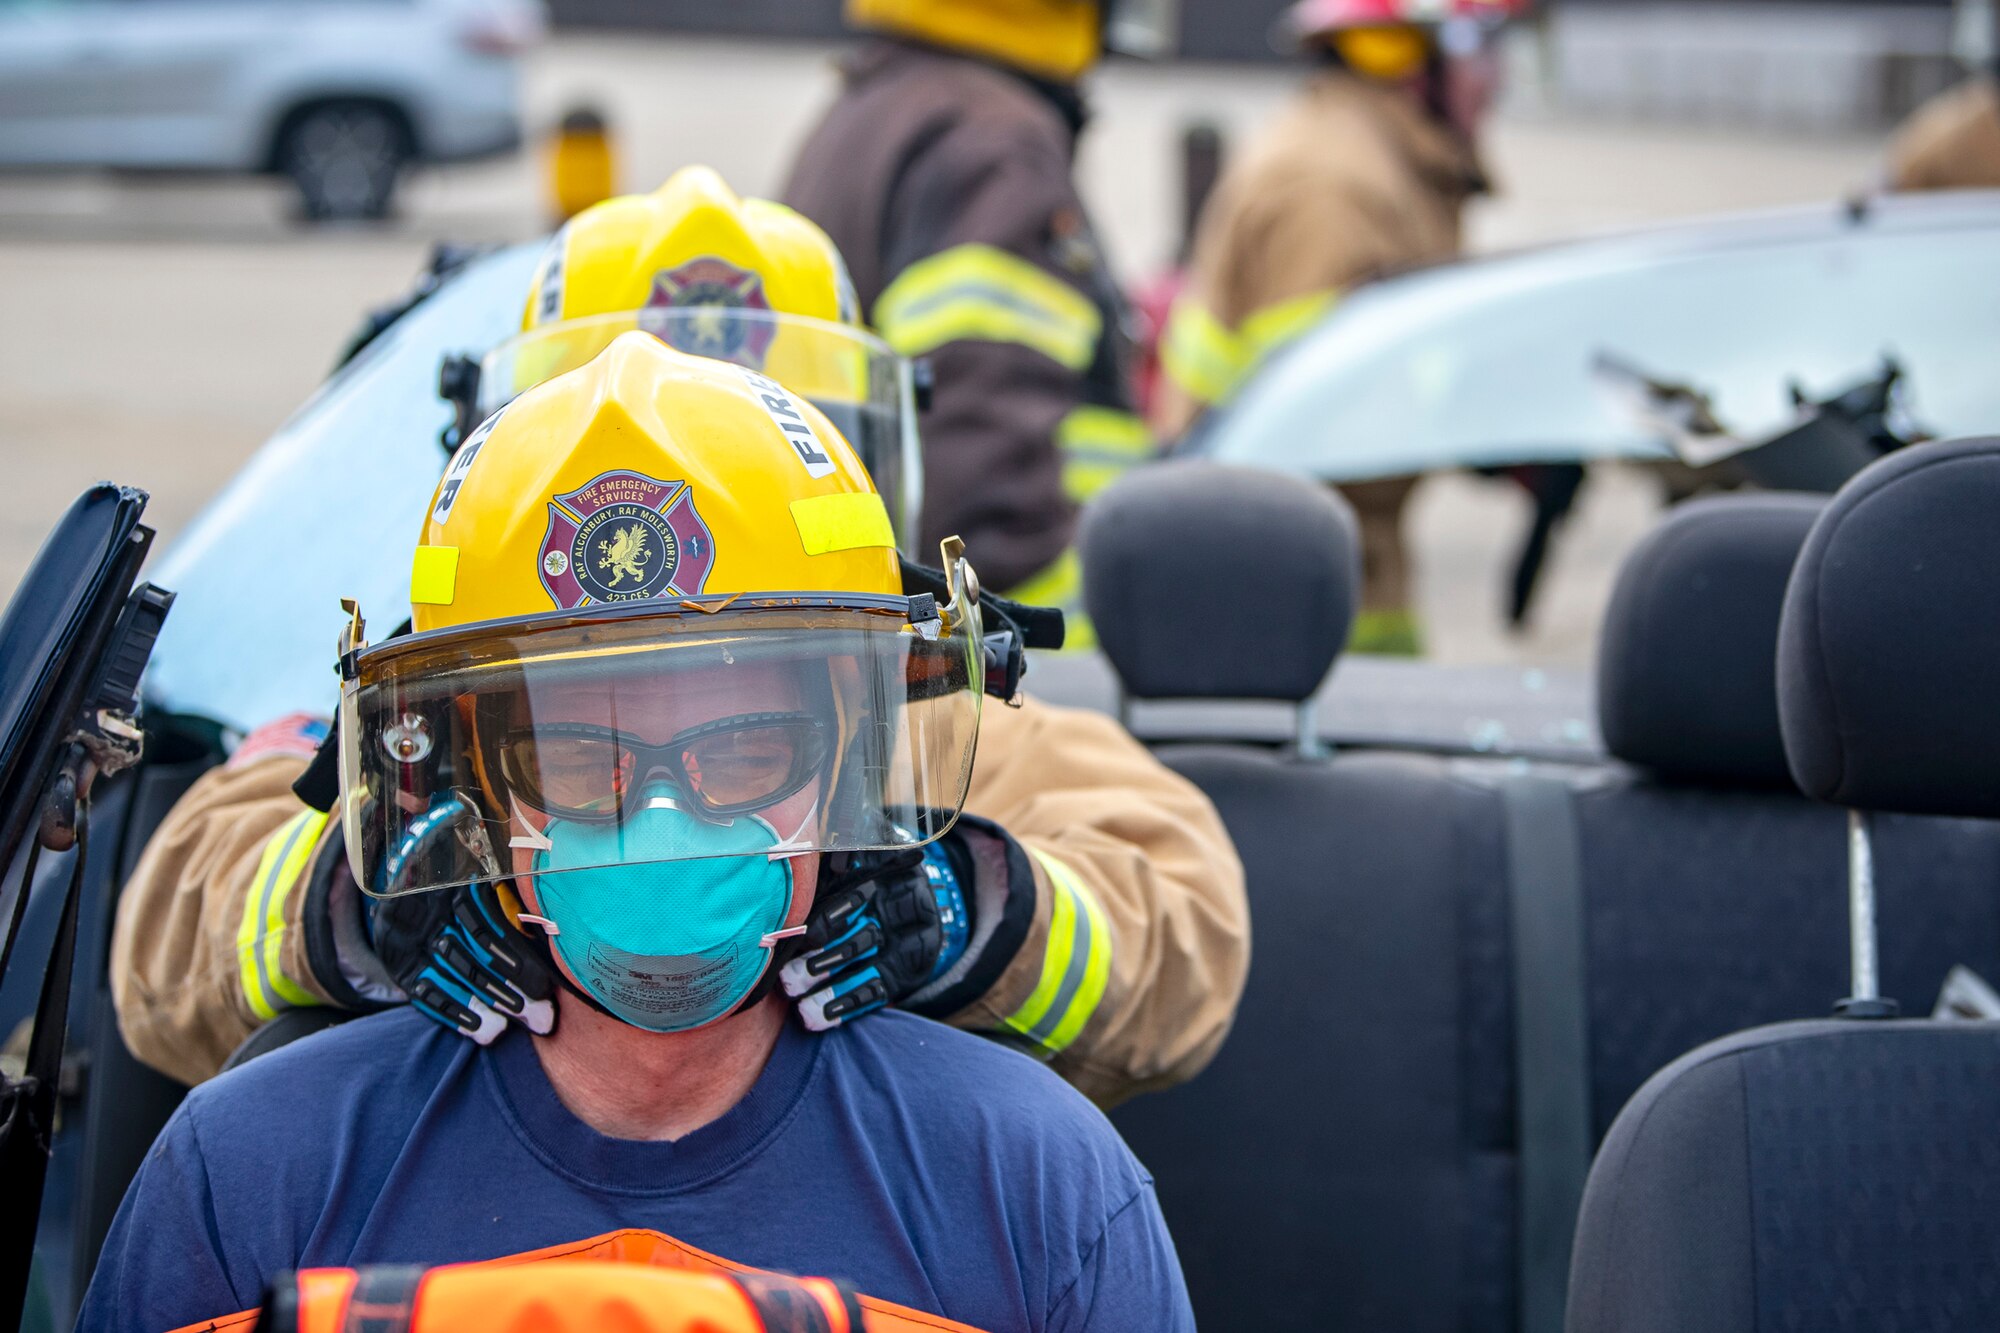 Firefighters from the 423d Civil Engineer Squadron, lift the upper section of a vehicle during a rescue demonstration at RAF Alconbury, England, Oct. 12, 2022. The demonstration was part of Fire Prevention Week in which firefighters from the 423d CES educated Airmen and dependents on proper fire safety habits. (U.S. Air Force photo by Staff Sgt. Eugene Oliver)